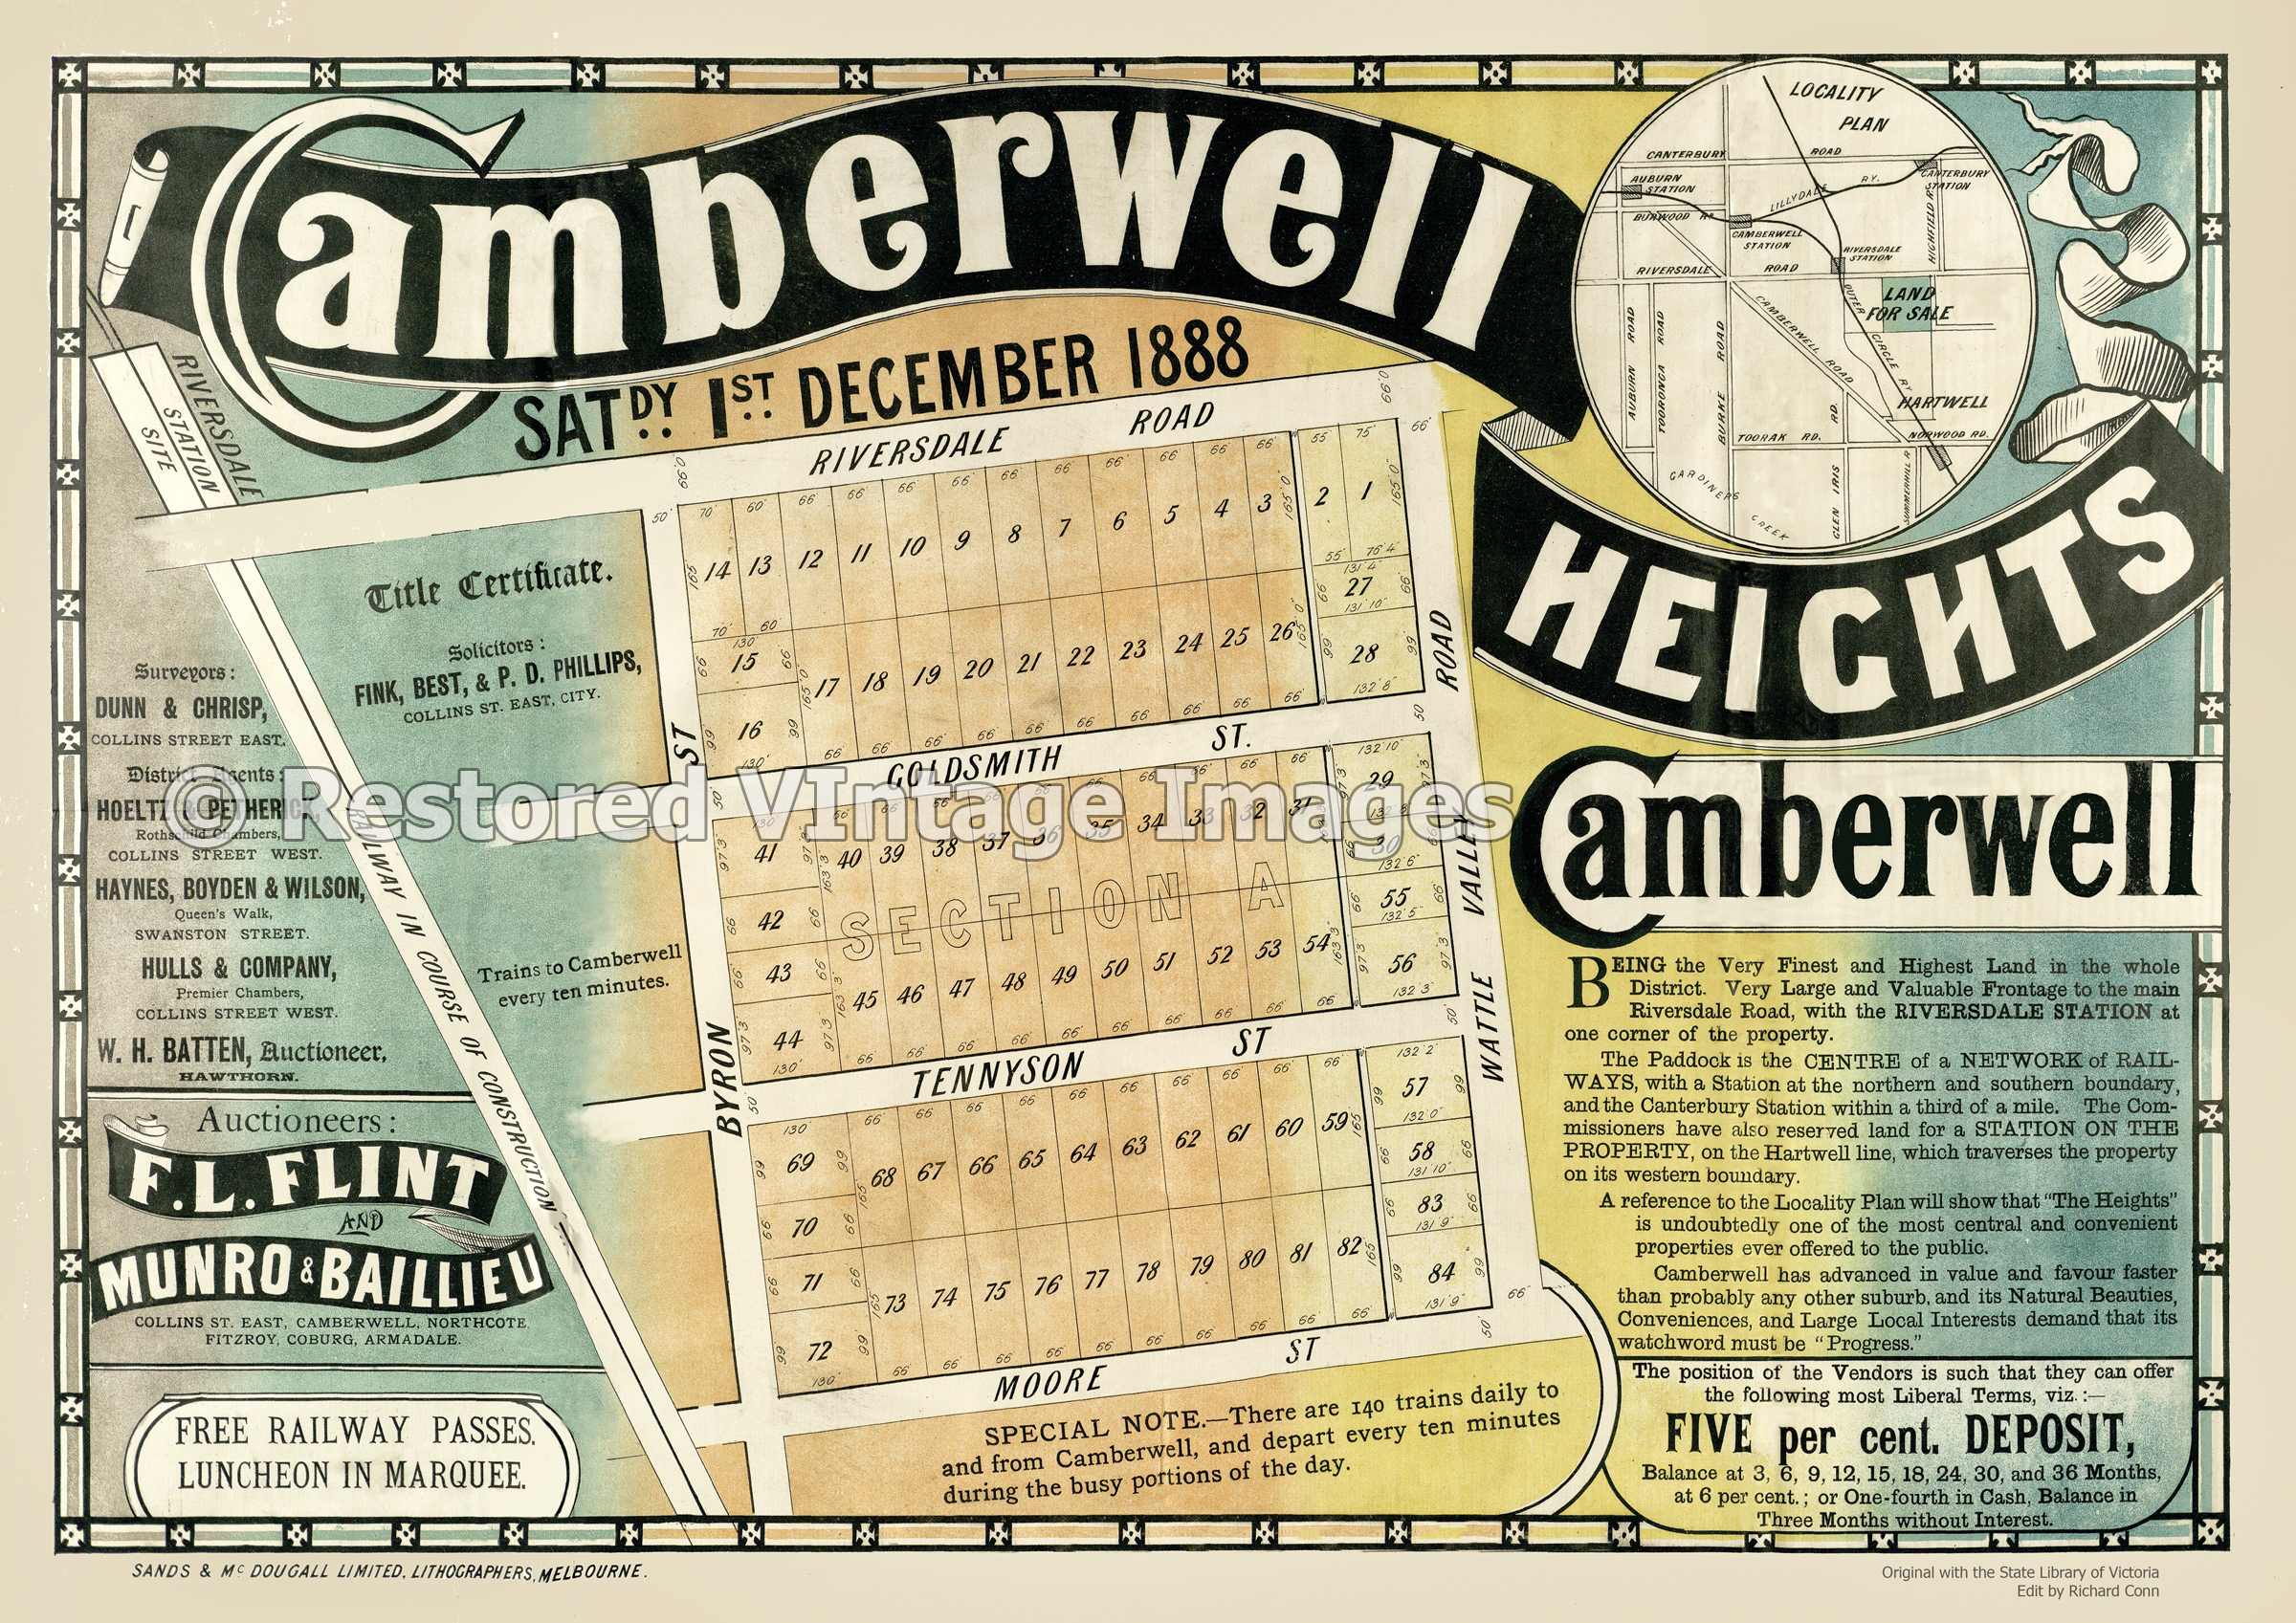 Camberwell Heights 1st December 1888 – Camberwell